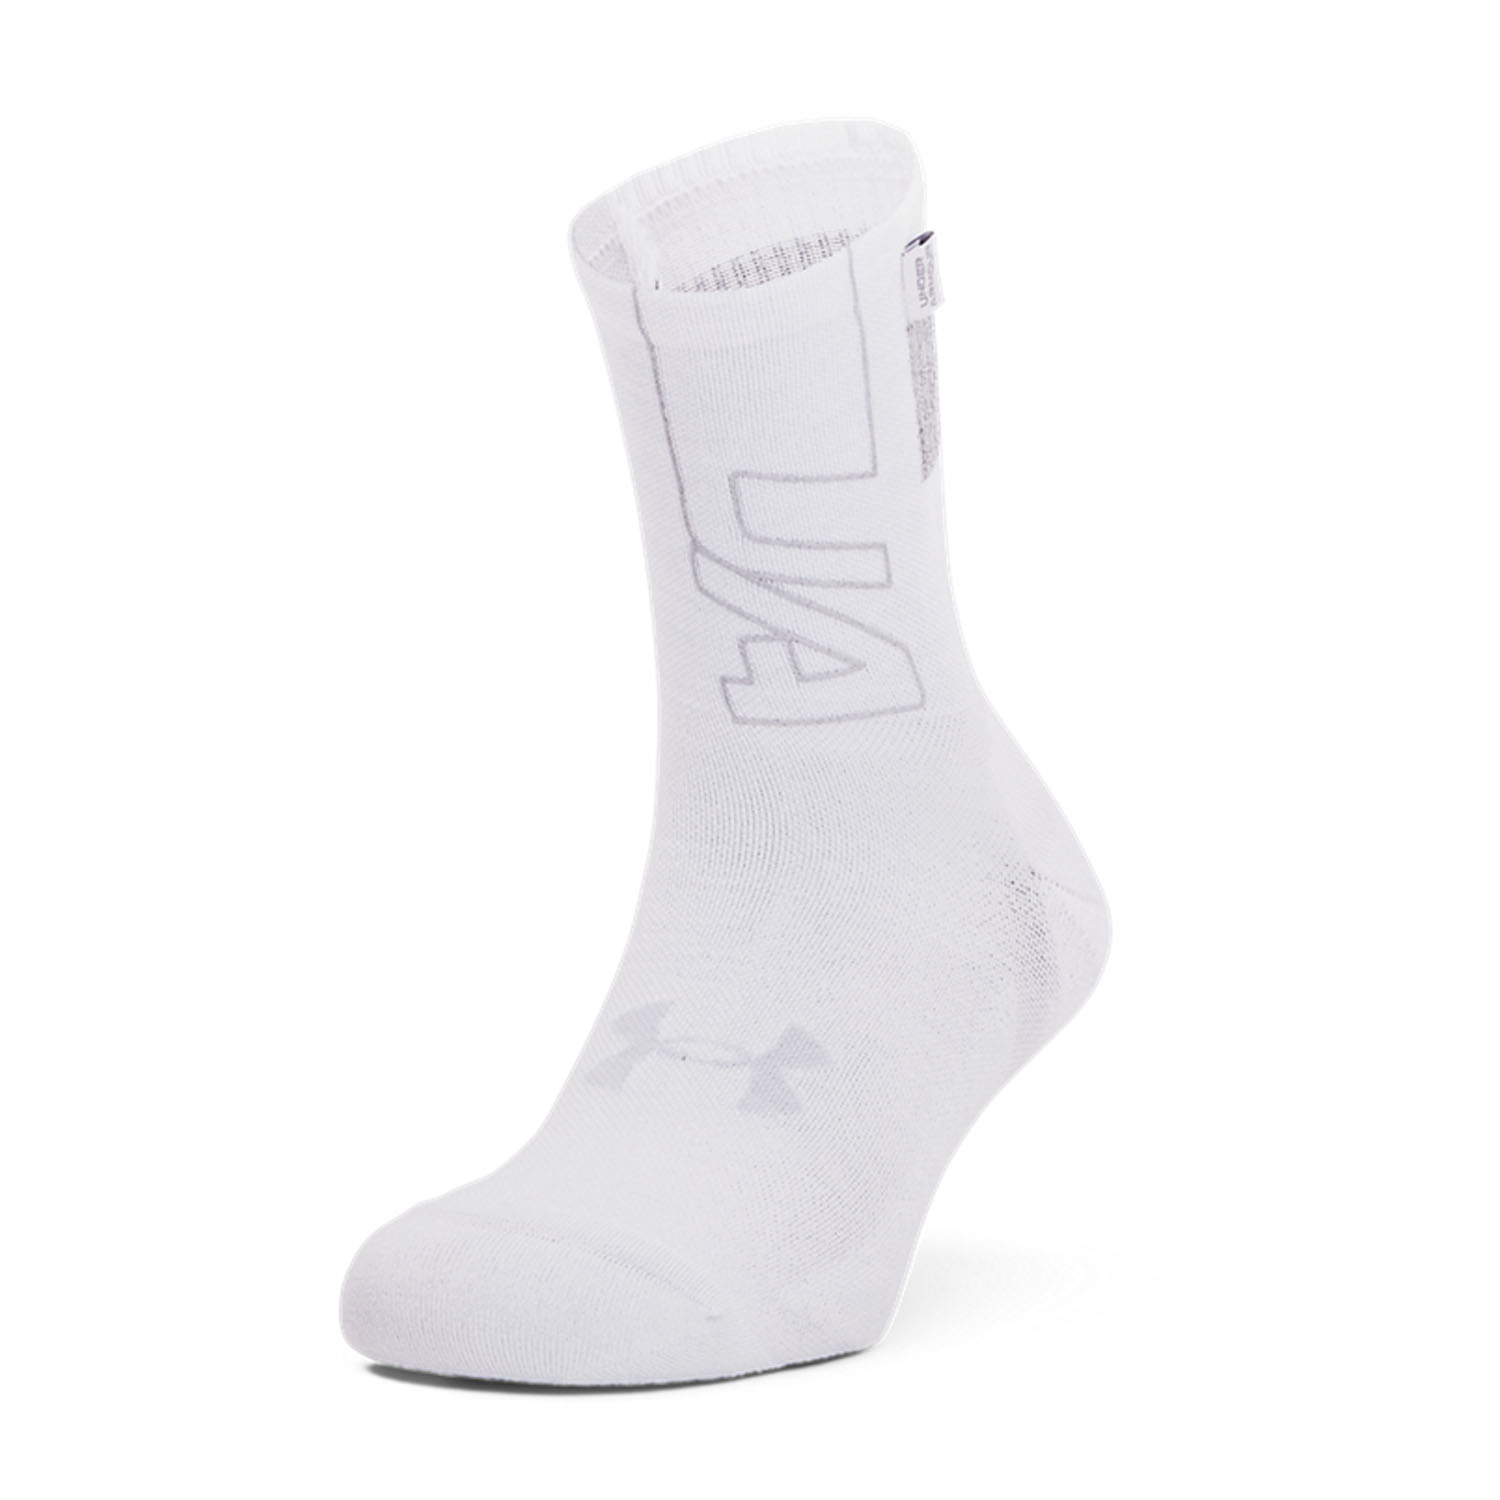 Under Armour Dry Crew Calze - White/Halo Gray/Mod Gray